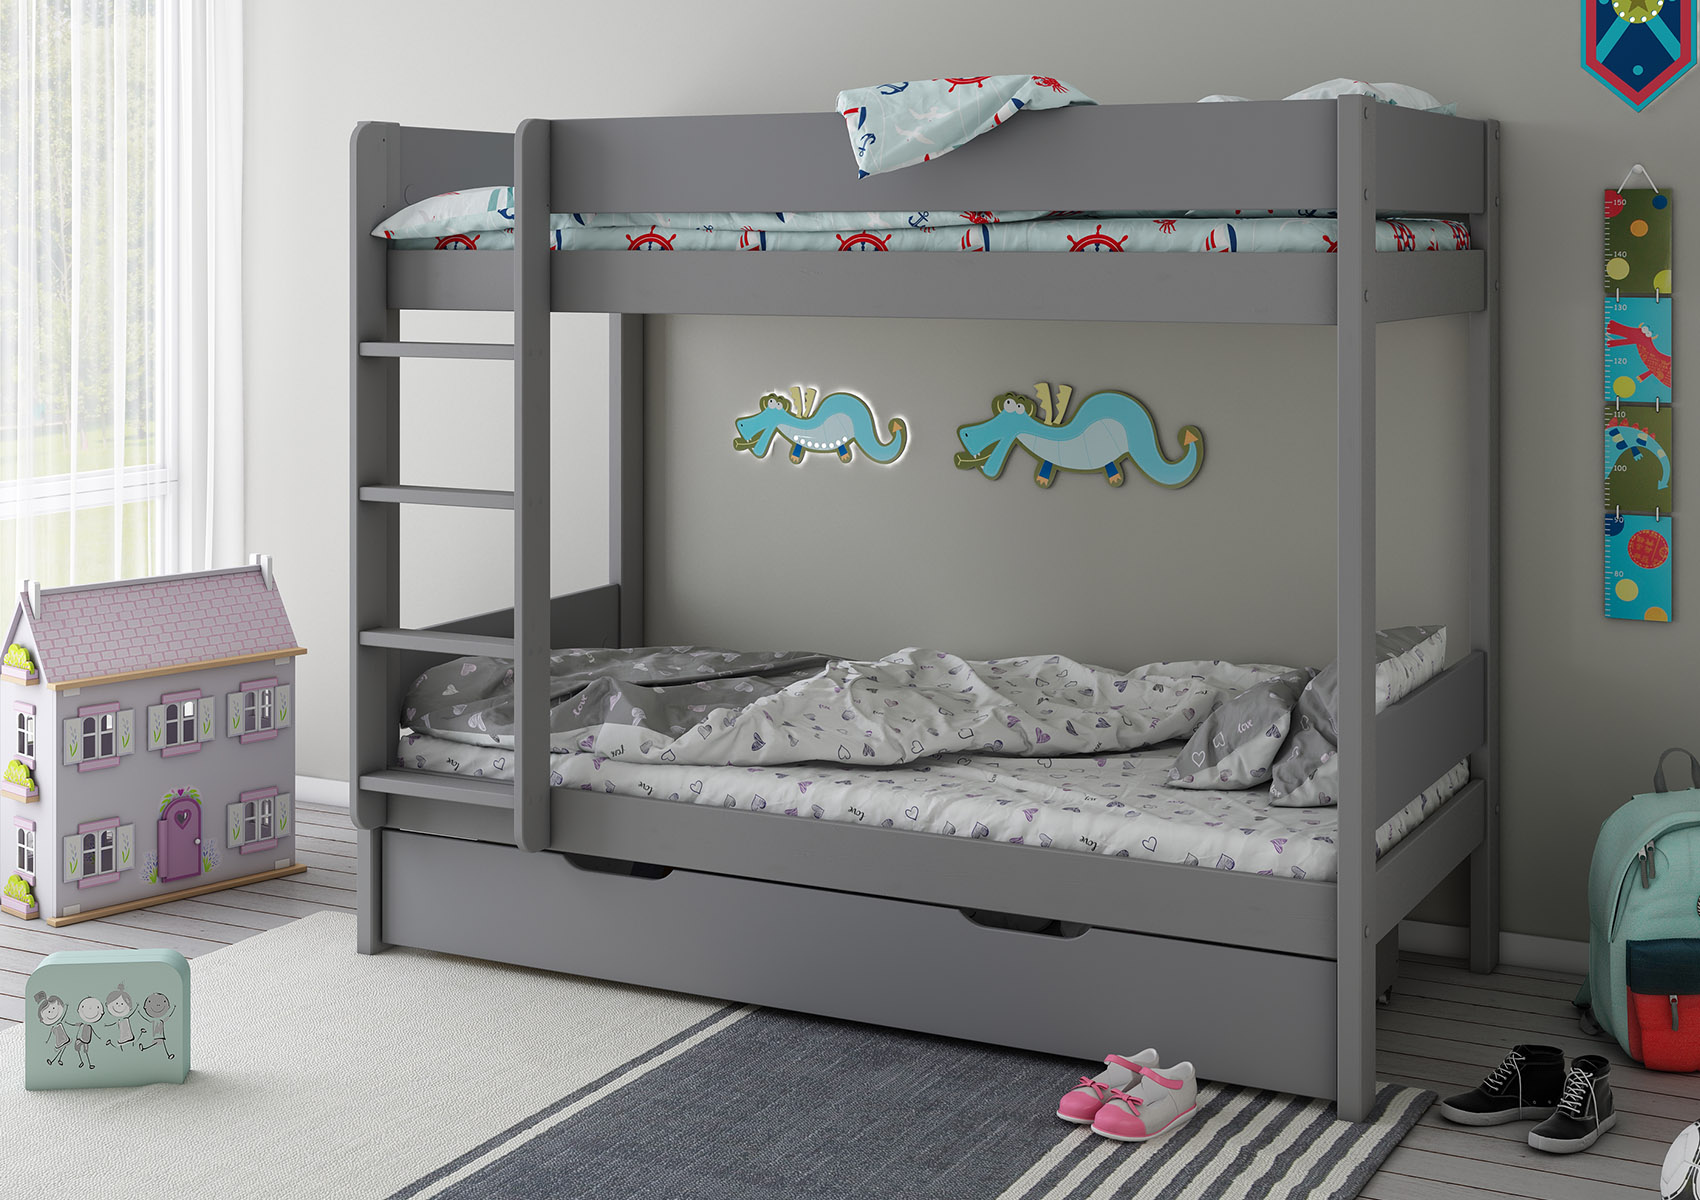 View Estella Grey Bunk Bed With Drawers Time4Sleep information